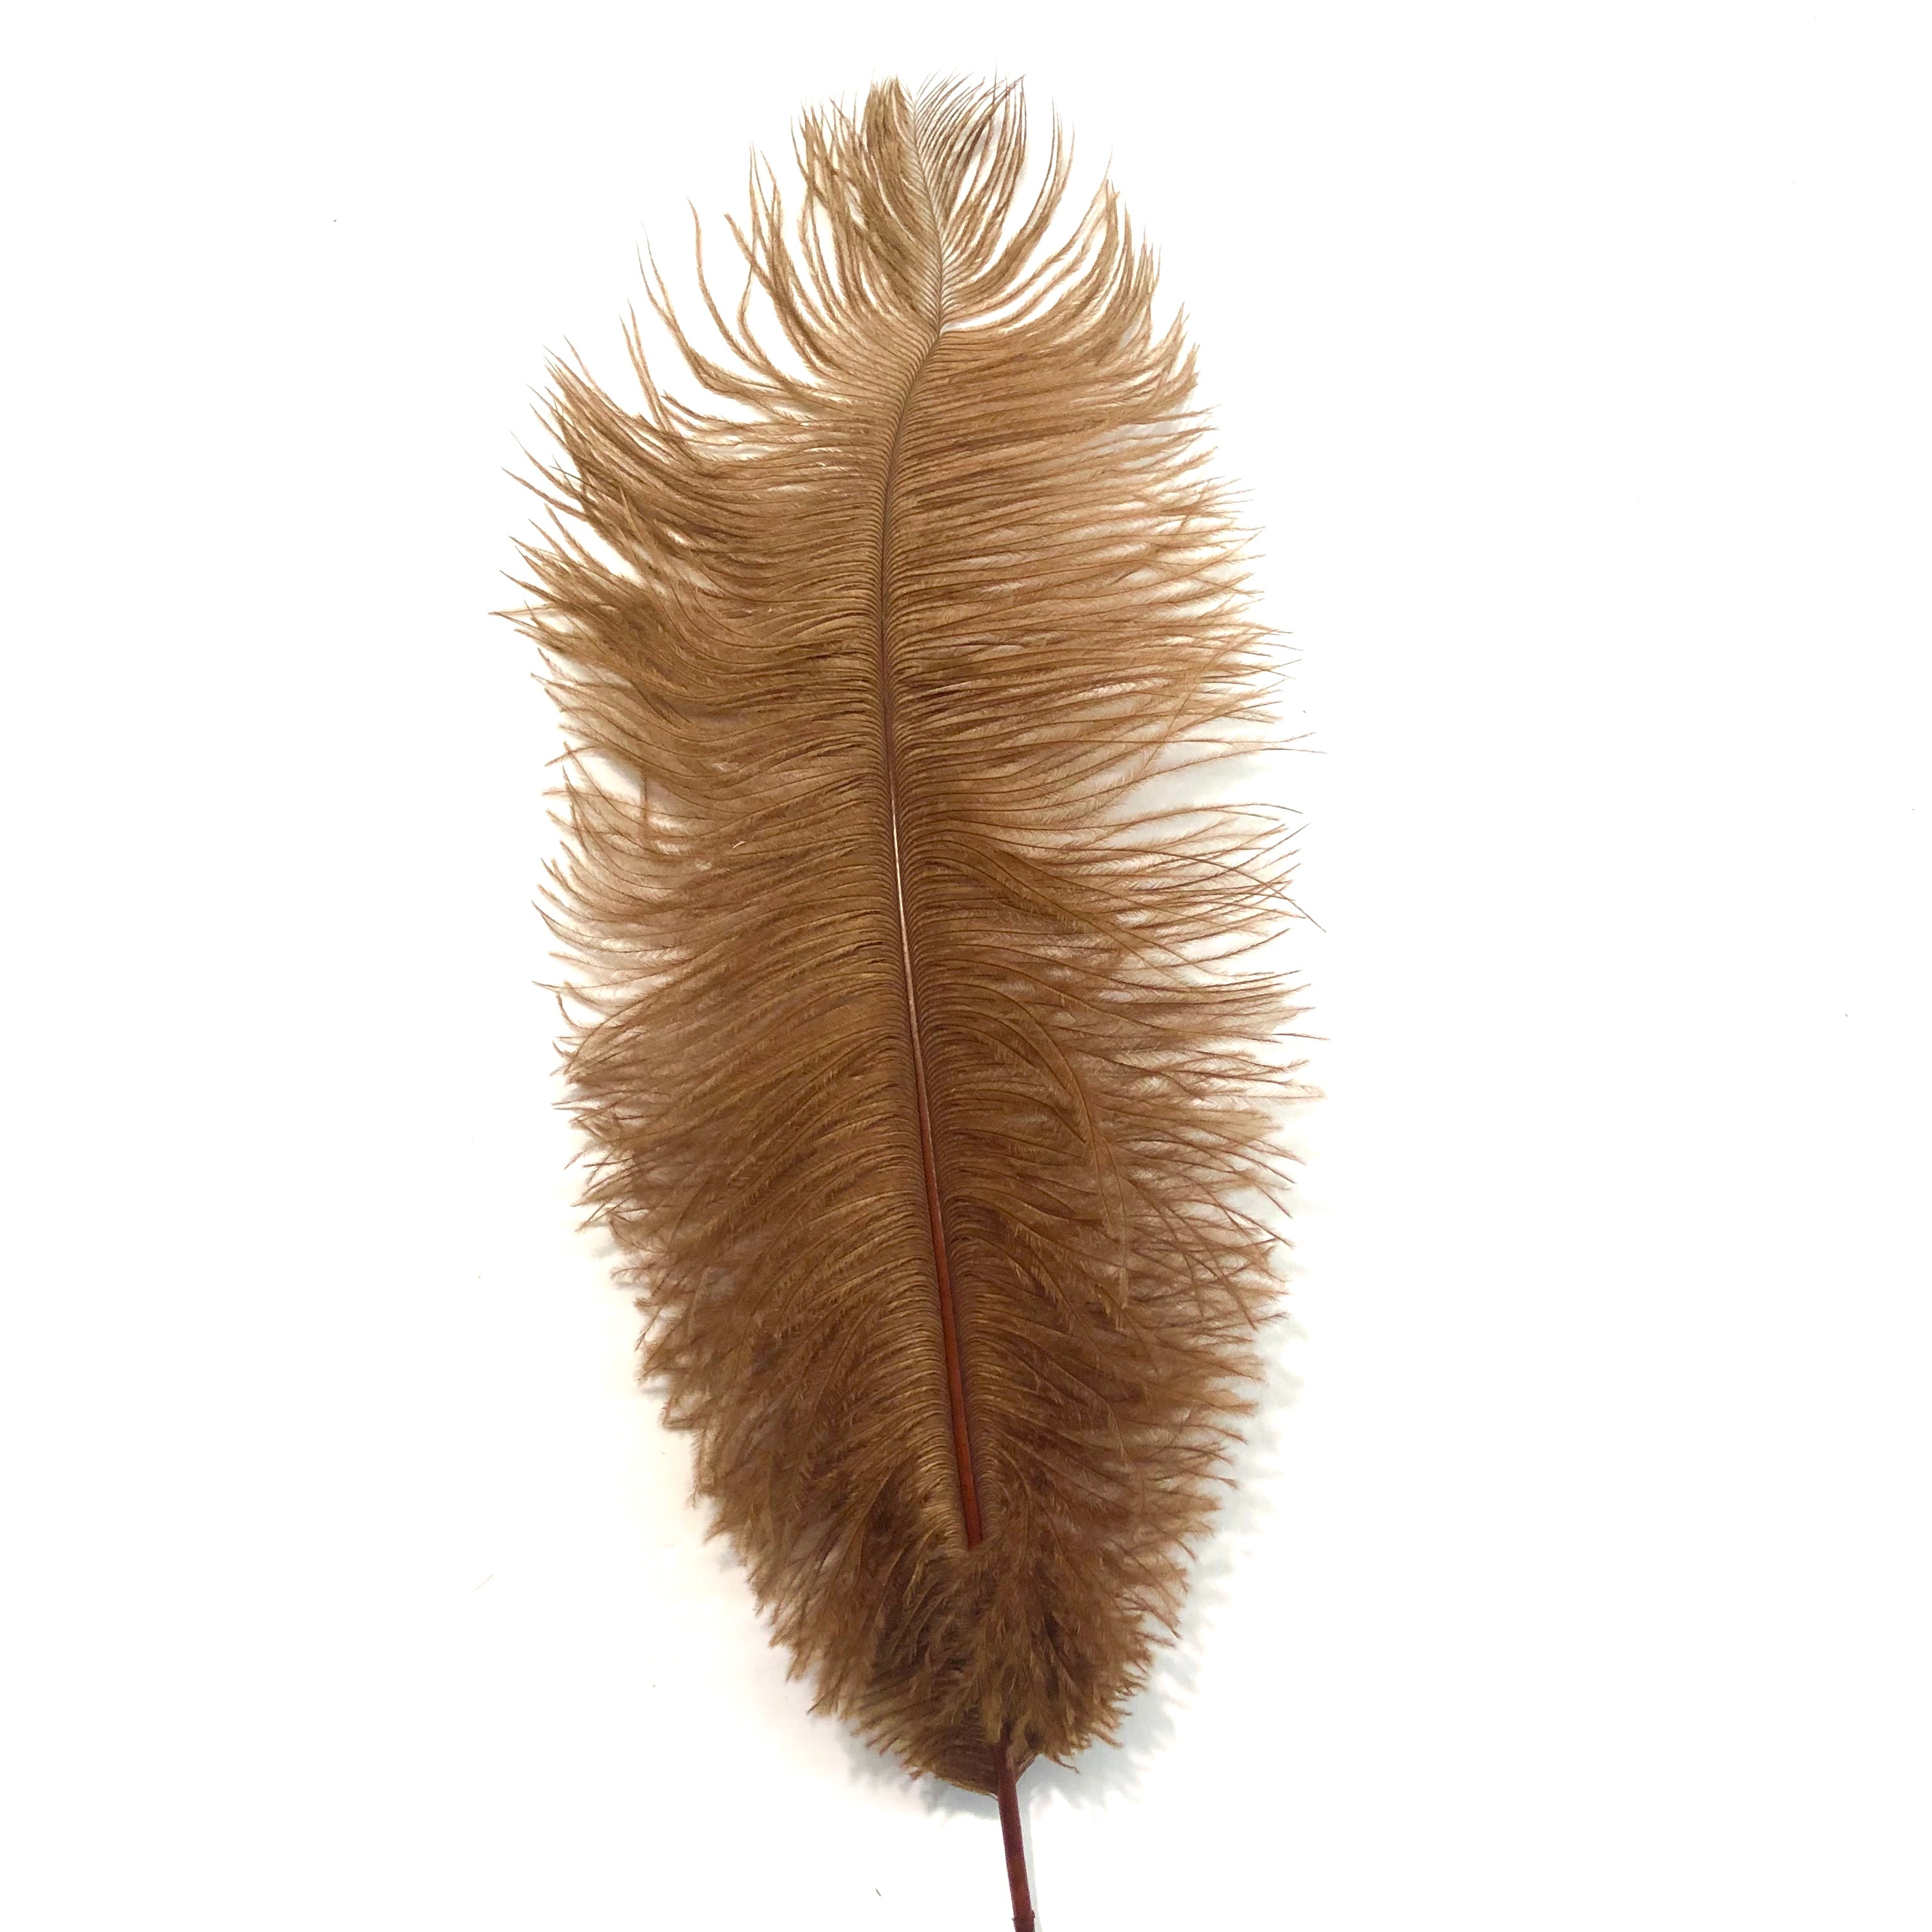 Ostrich Feather Drab 37-42cm - Rust Brown